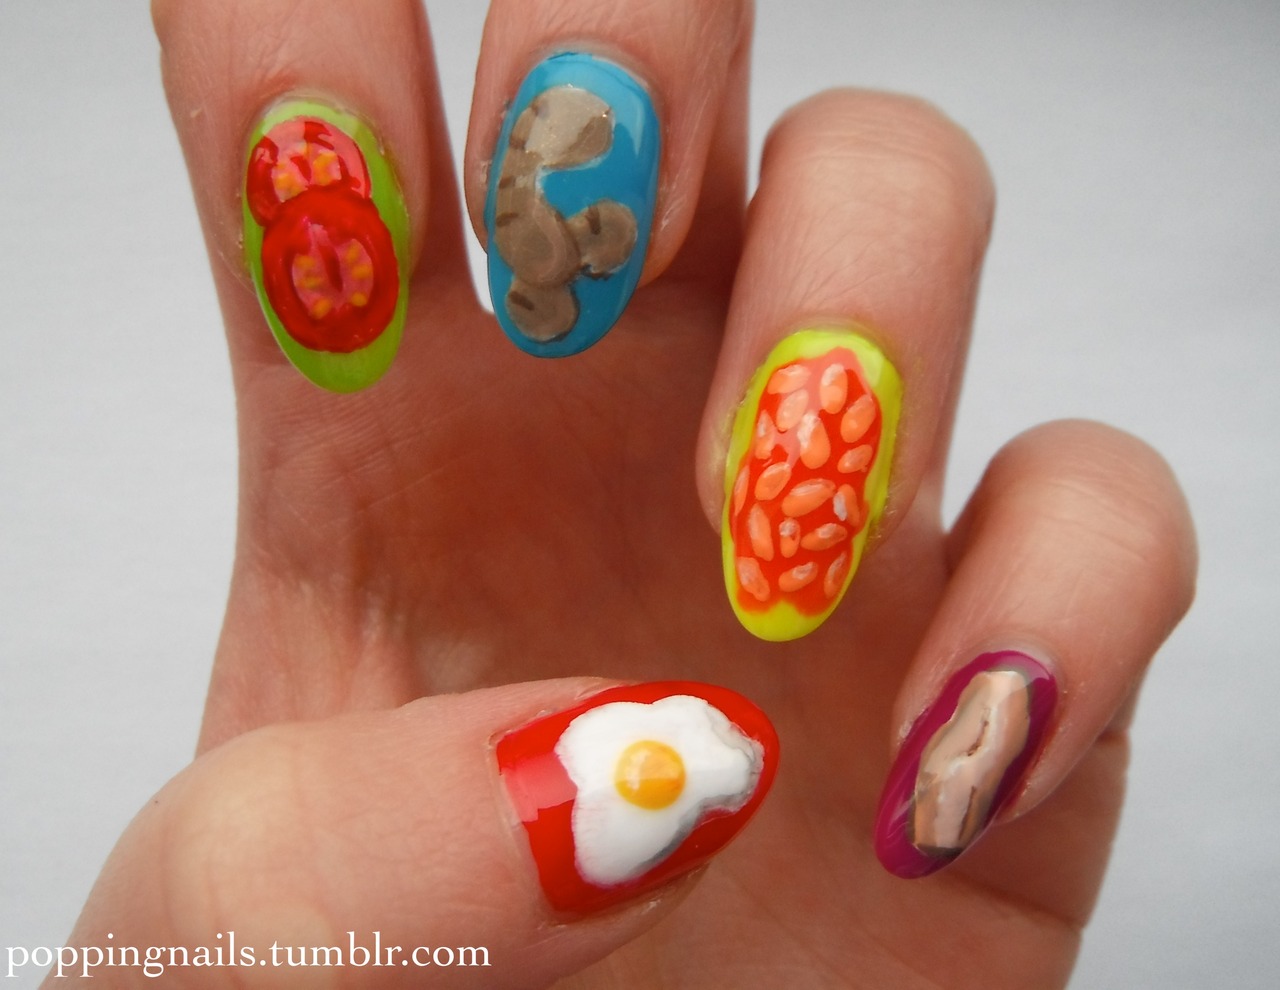 3. "Adorable and Amusing Nail Art for a Good Laugh" - wide 2